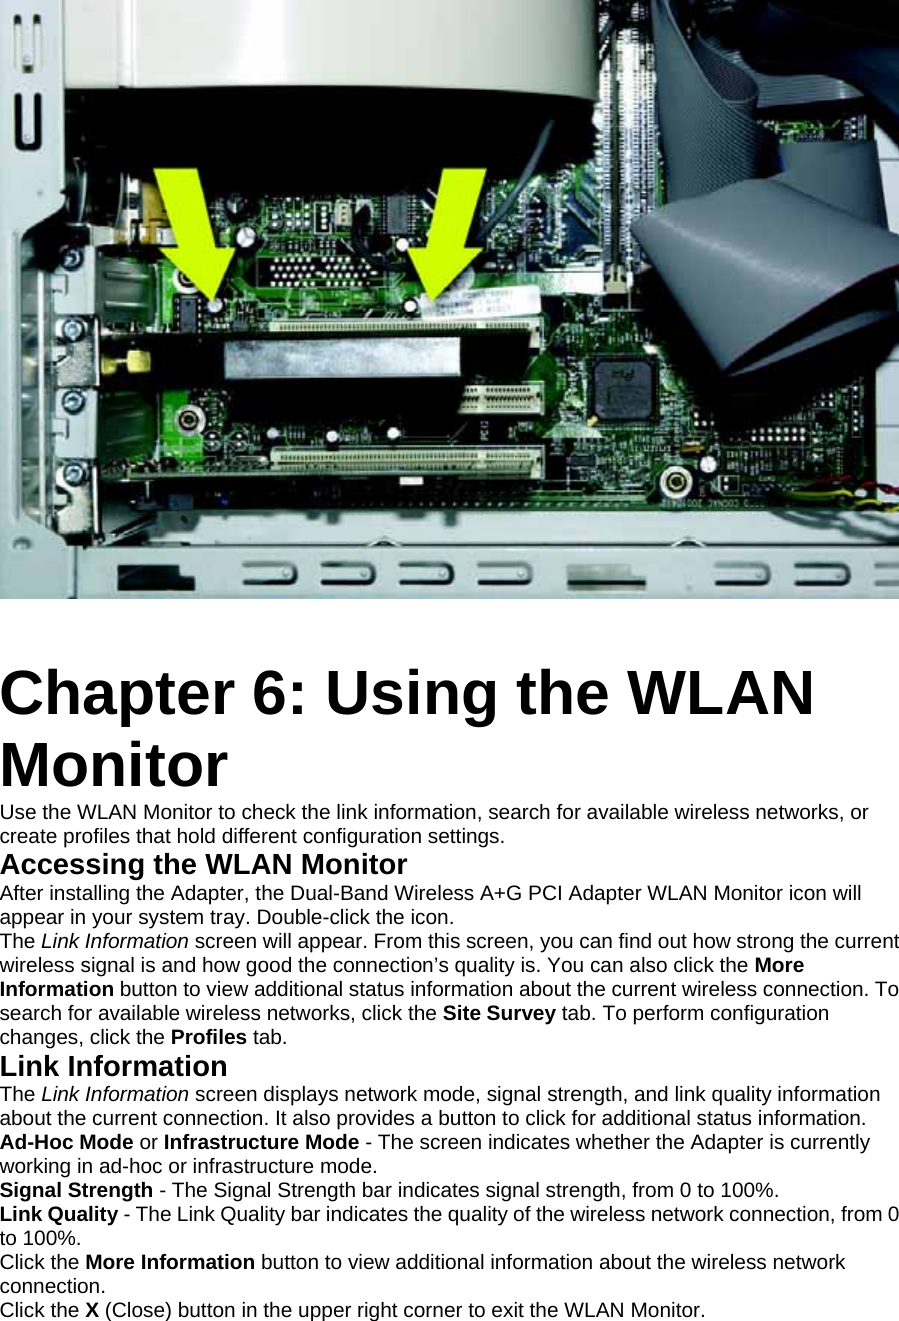    Chapter 6: Using the WLAN Monitor Use the WLAN Monitor to check the link information, search for available wireless networks, or create profiles that hold different configuration settings. Accessing the WLAN Monitor After installing the Adapter, the Dual-Band Wireless A+G PCI Adapter WLAN Monitor icon will appear in your system tray. Double-click the icon. The Link Information screen will appear. From this screen, you can find out how strong the current wireless signal is and how good the connection’s quality is. You can also click the More Information button to view additional status information about the current wireless connection. To search for available wireless networks, click the Site Survey tab. To perform configuration changes, click the Profiles tab. Link Information The Link Information screen displays network mode, signal strength, and link quality information about the current connection. It also provides a button to click for additional status information. Ad-Hoc Mode or Infrastructure Mode - The screen indicates whether the Adapter is currently working in ad-hoc or infrastructure mode. Signal Strength - The Signal Strength bar indicates signal strength, from 0 to 100%. Link Quality - The Link Quality bar indicates the quality of the wireless network connection, from 0 to 100%. Click the More Information button to view additional information about the wireless network connection. Click the X (Close) button in the upper right corner to exit the WLAN Monitor. 